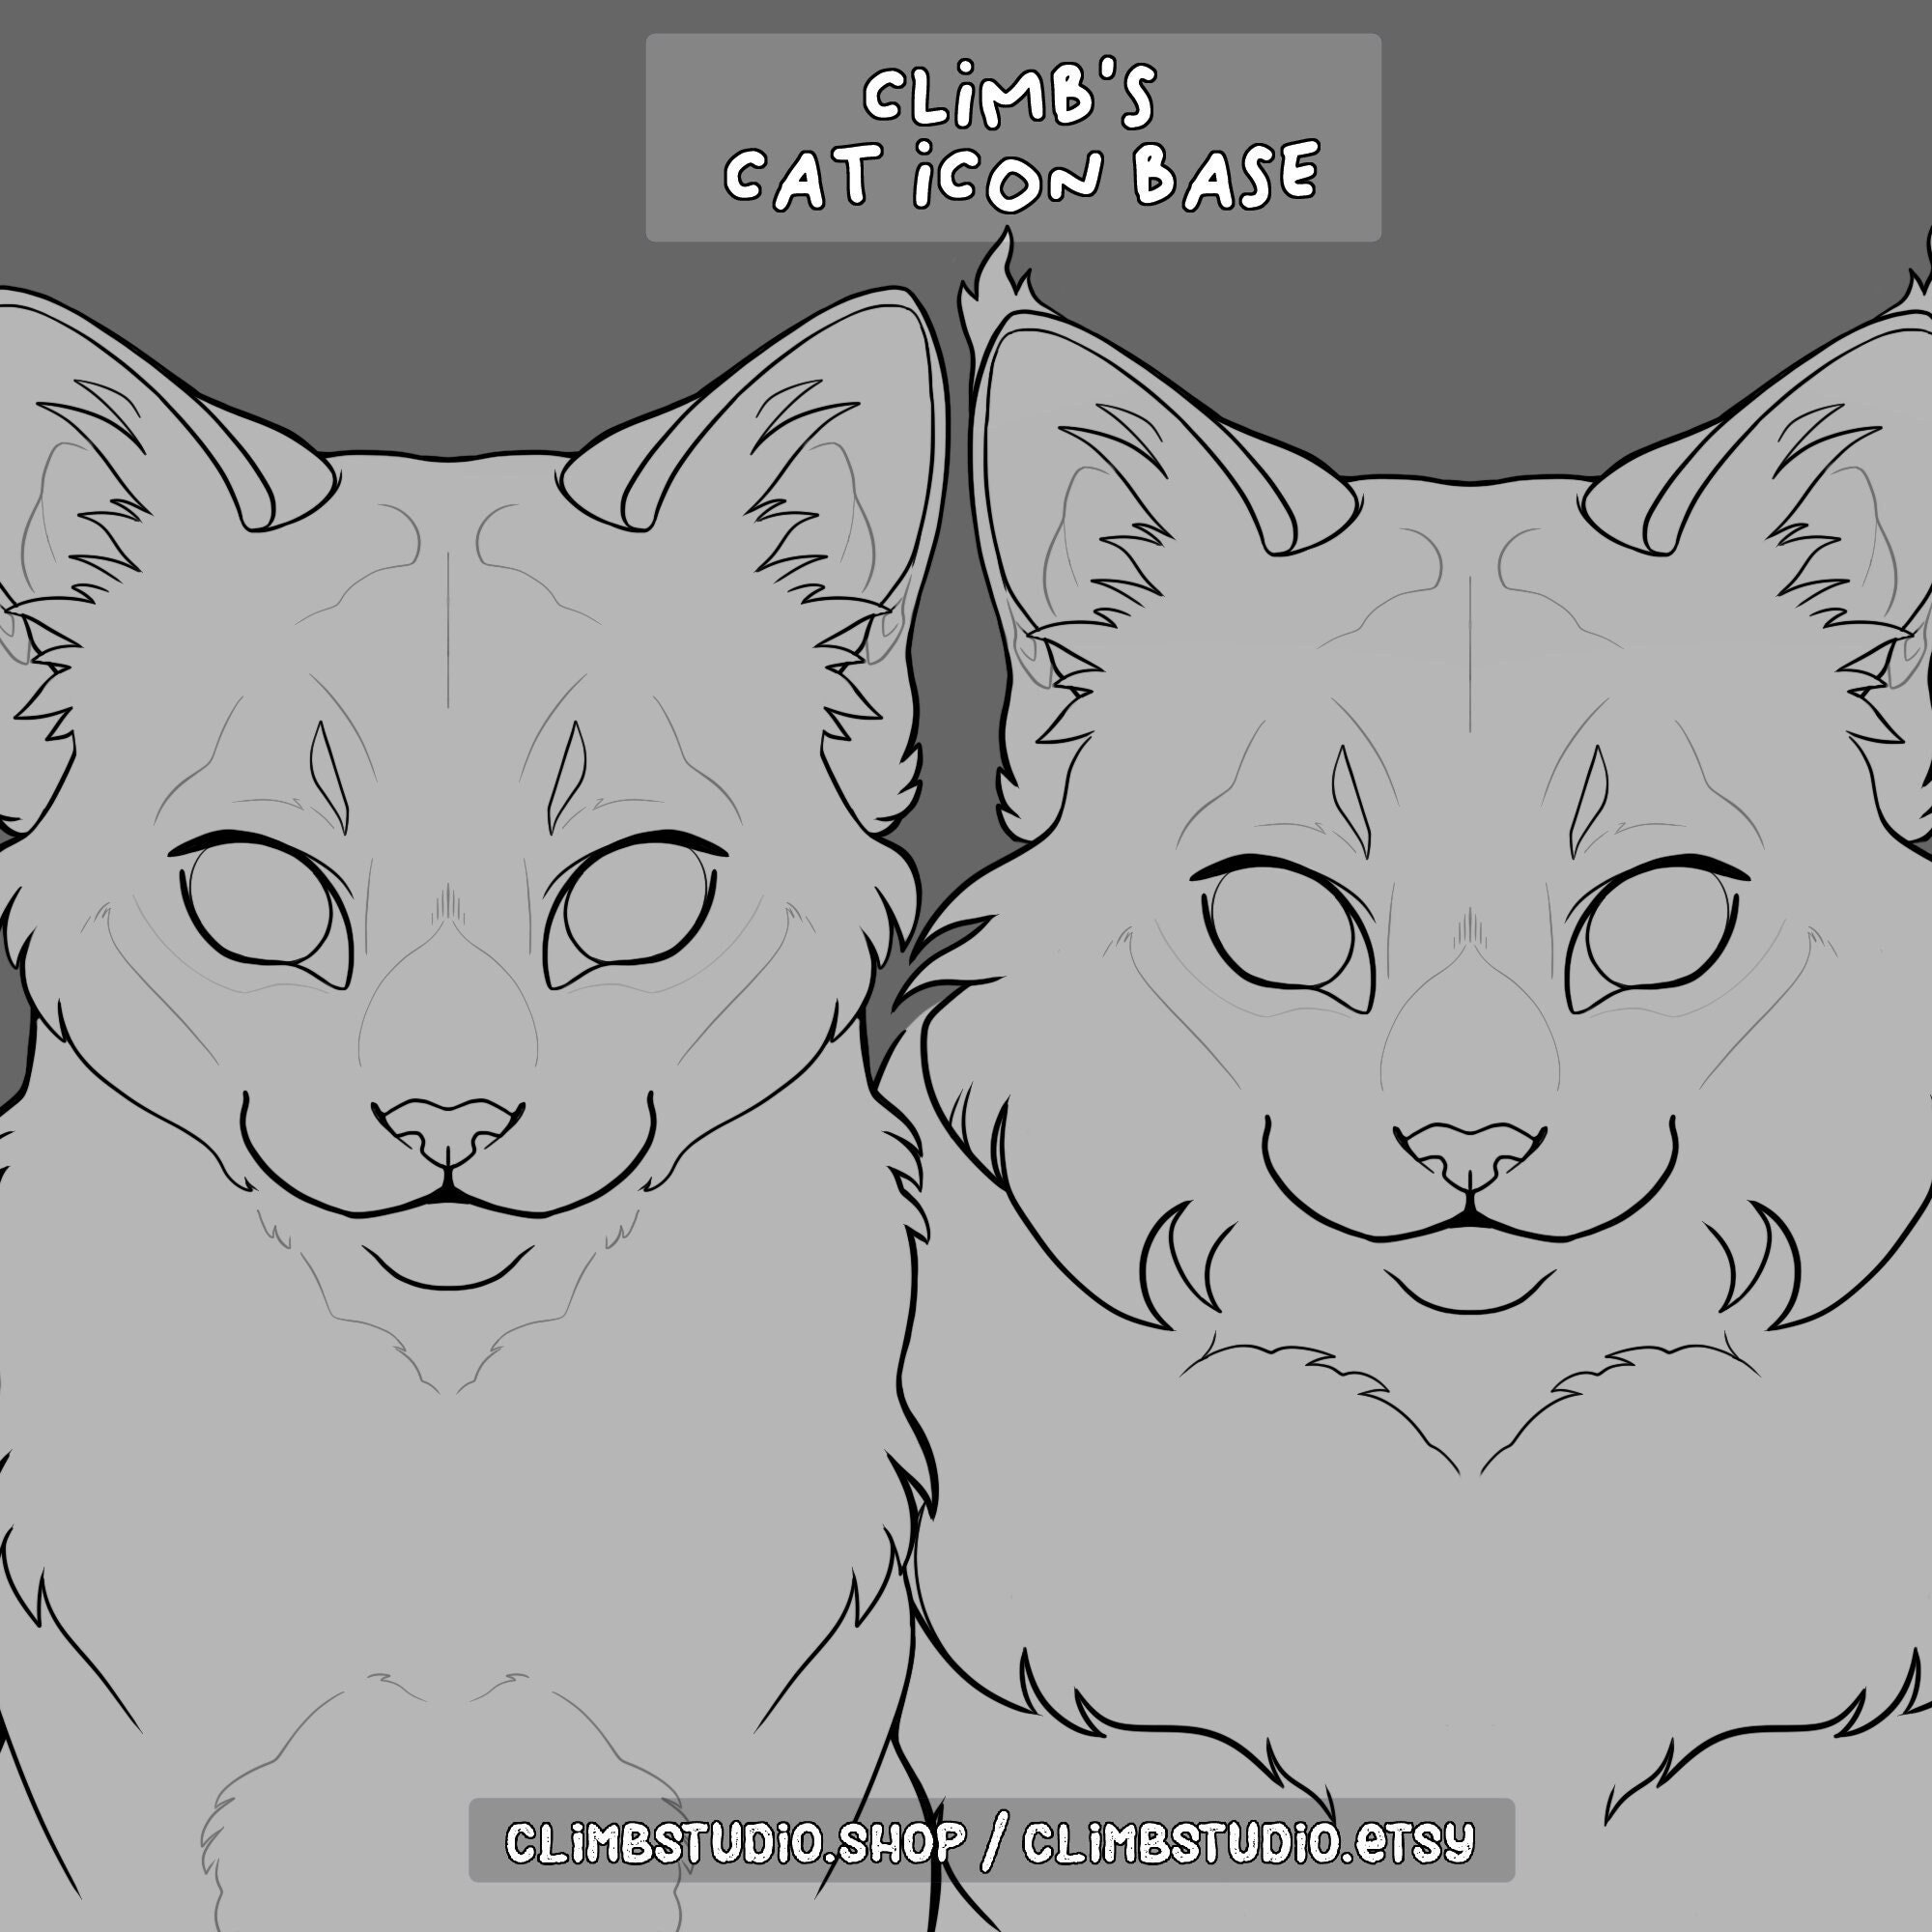 8 Cat matching icon ideas  cat icon, cat couple, cute cats